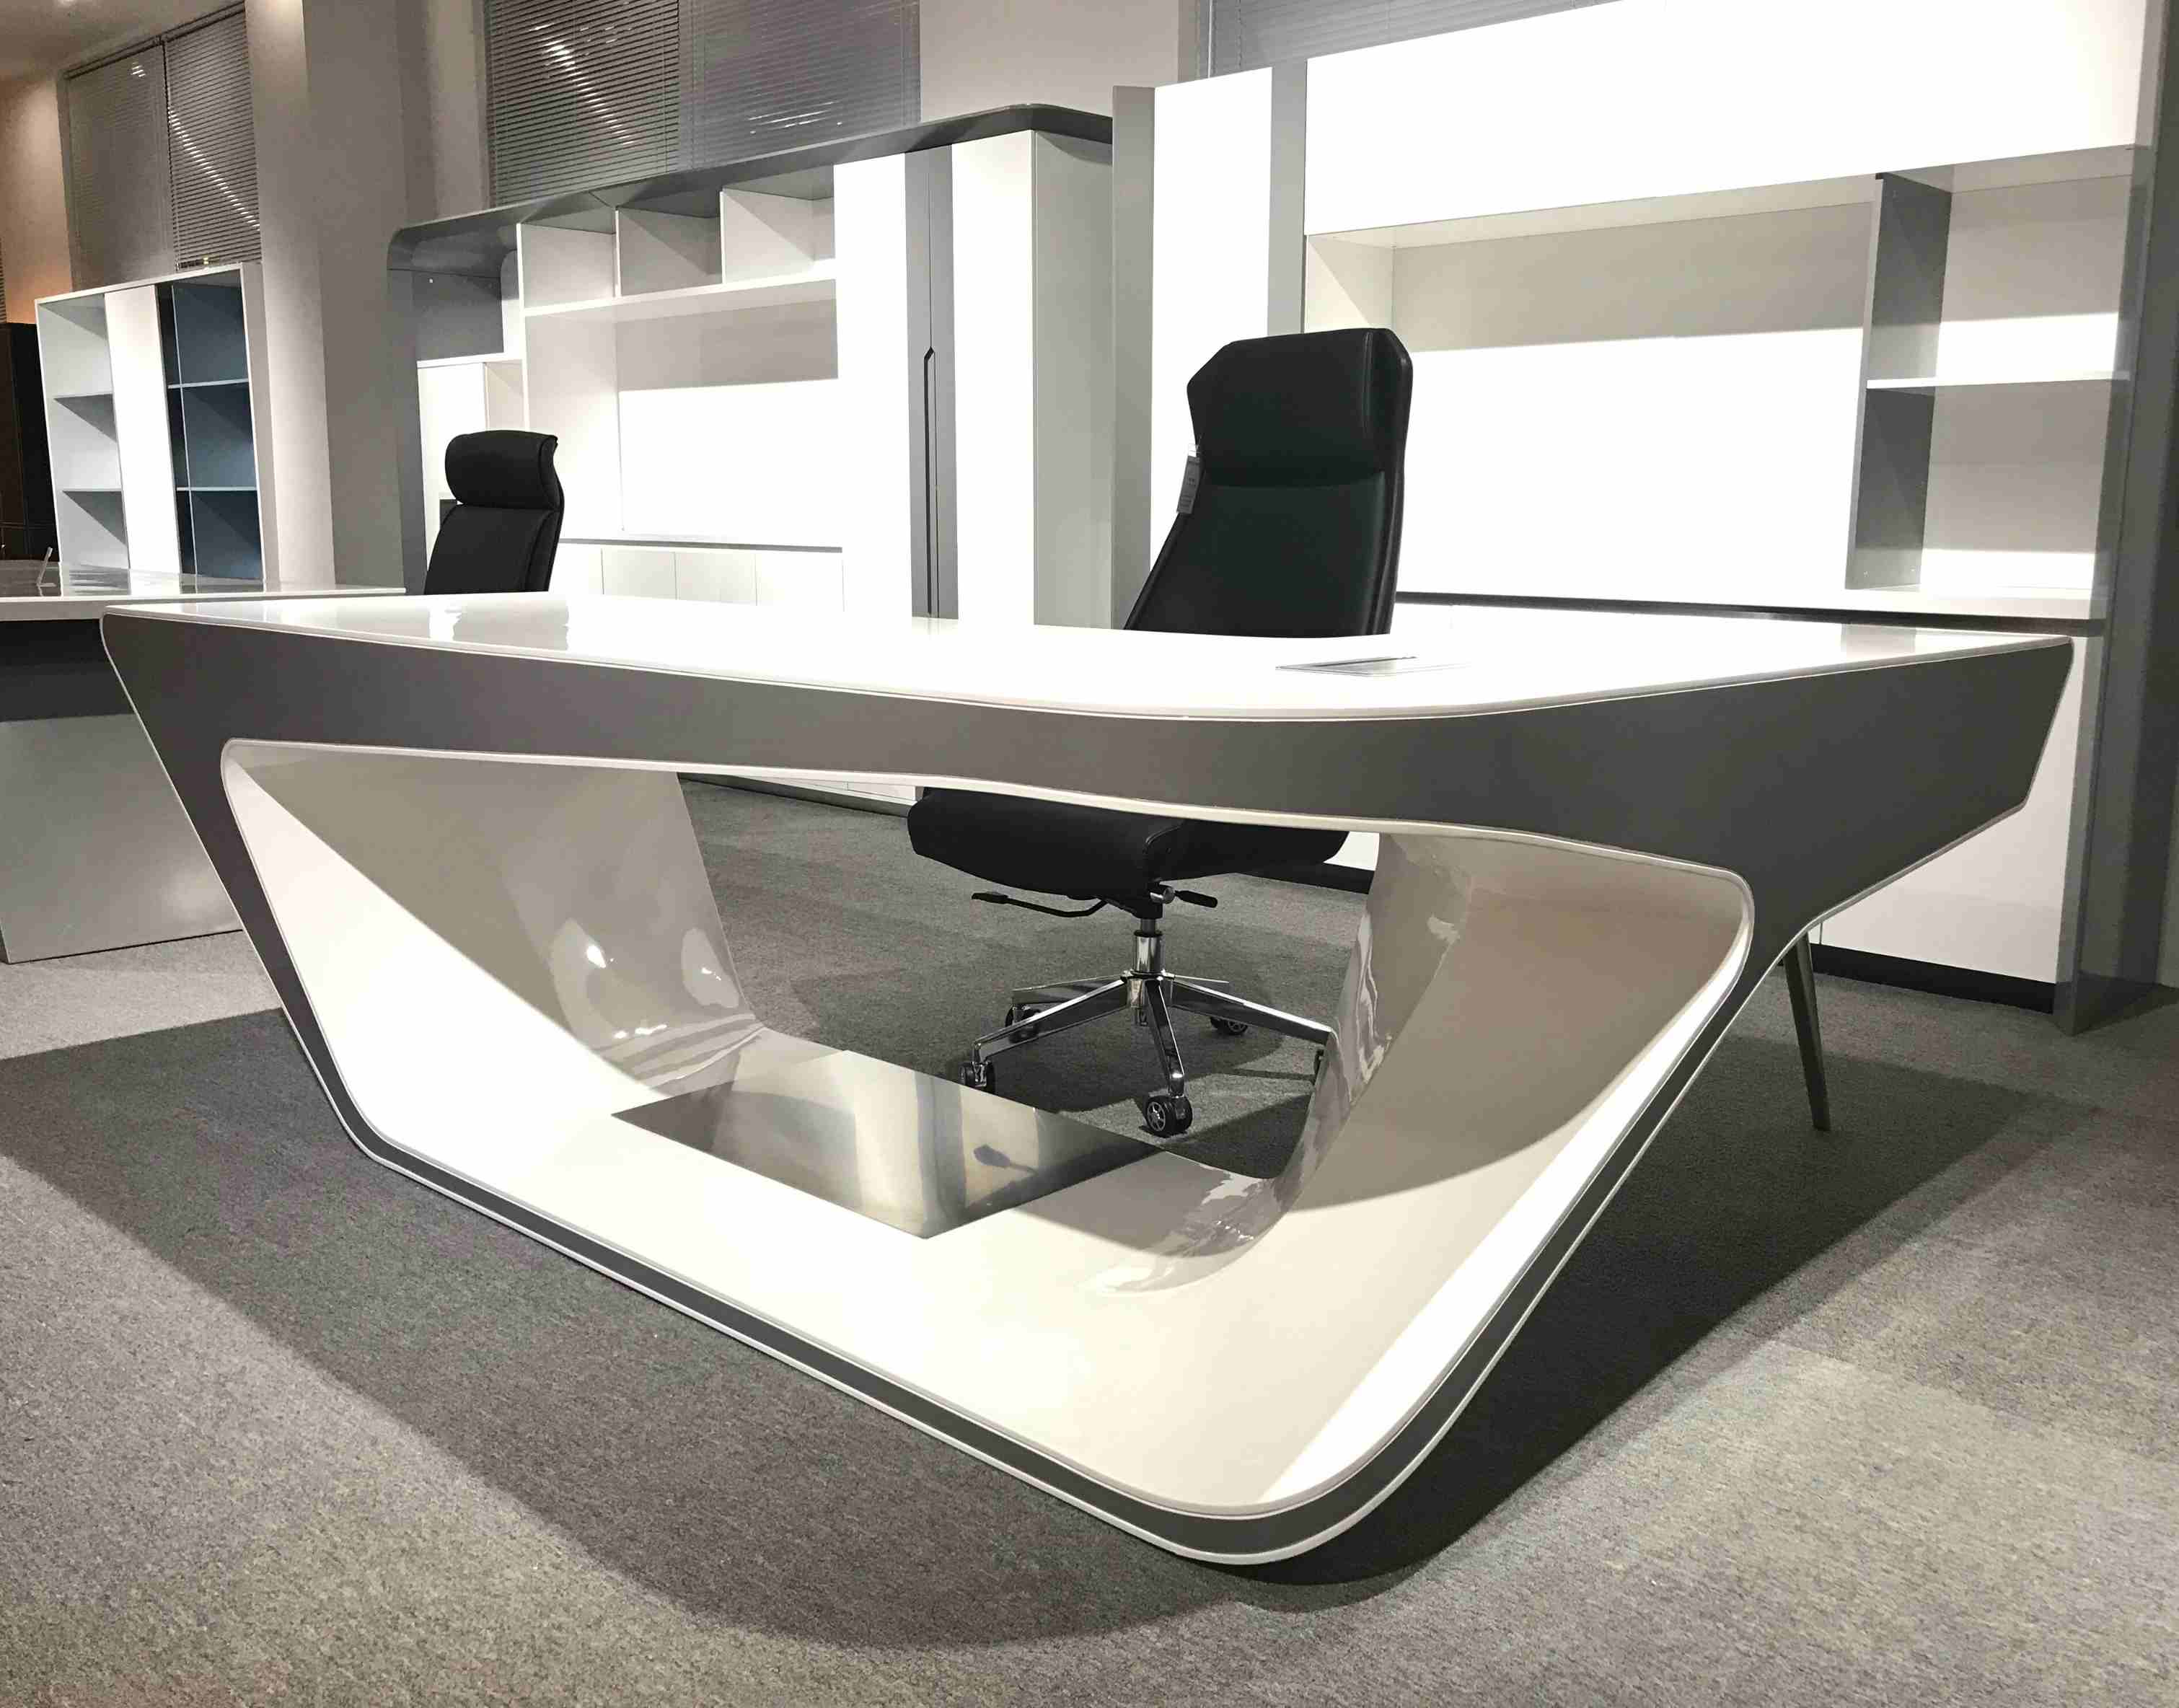 Do you know the most popular desk type in 2021?